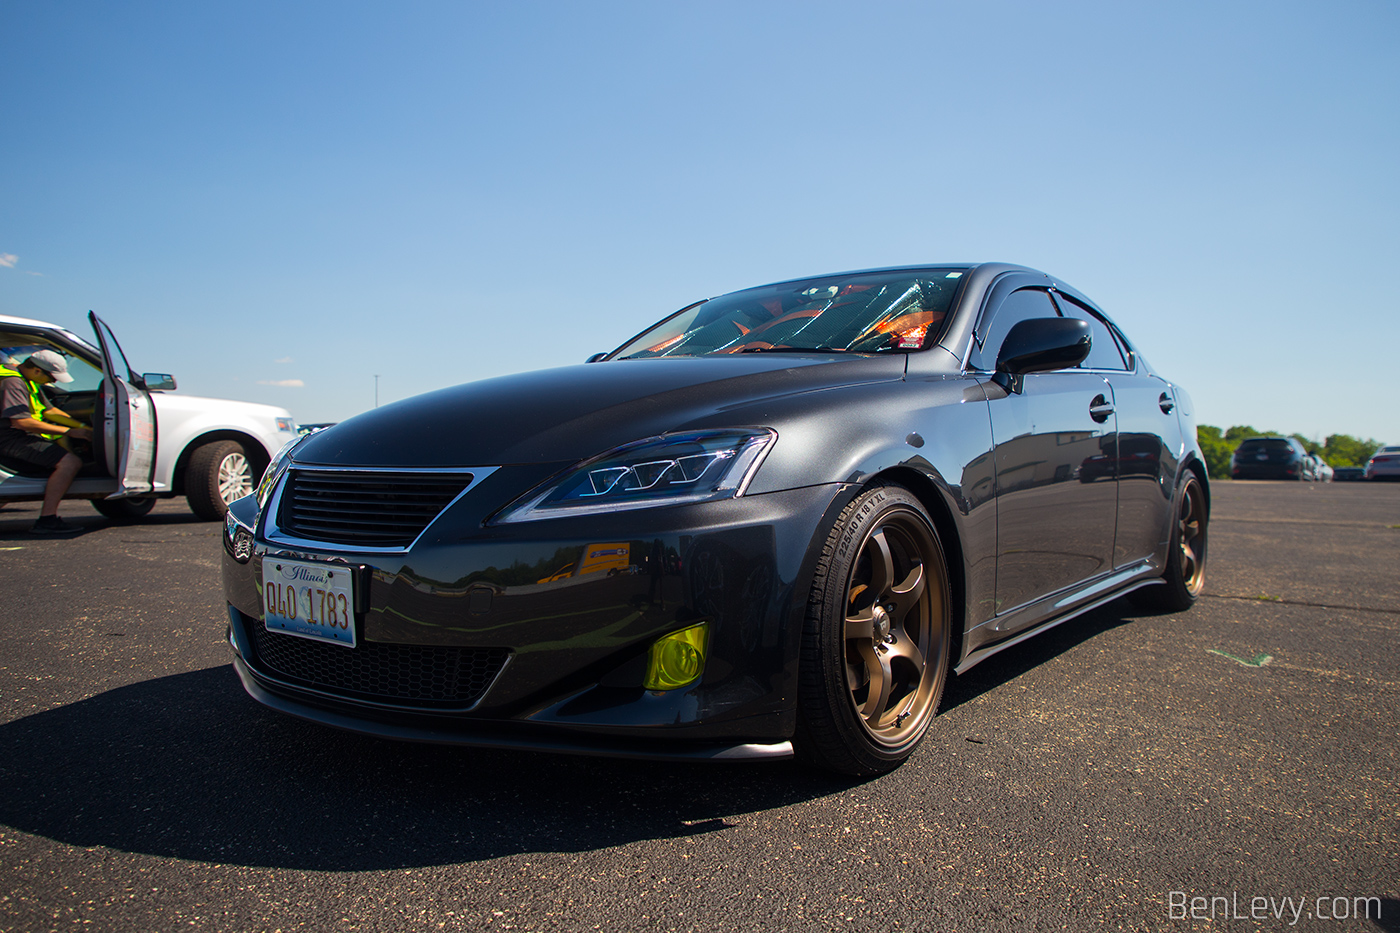 Lexus IS250 at Track Event